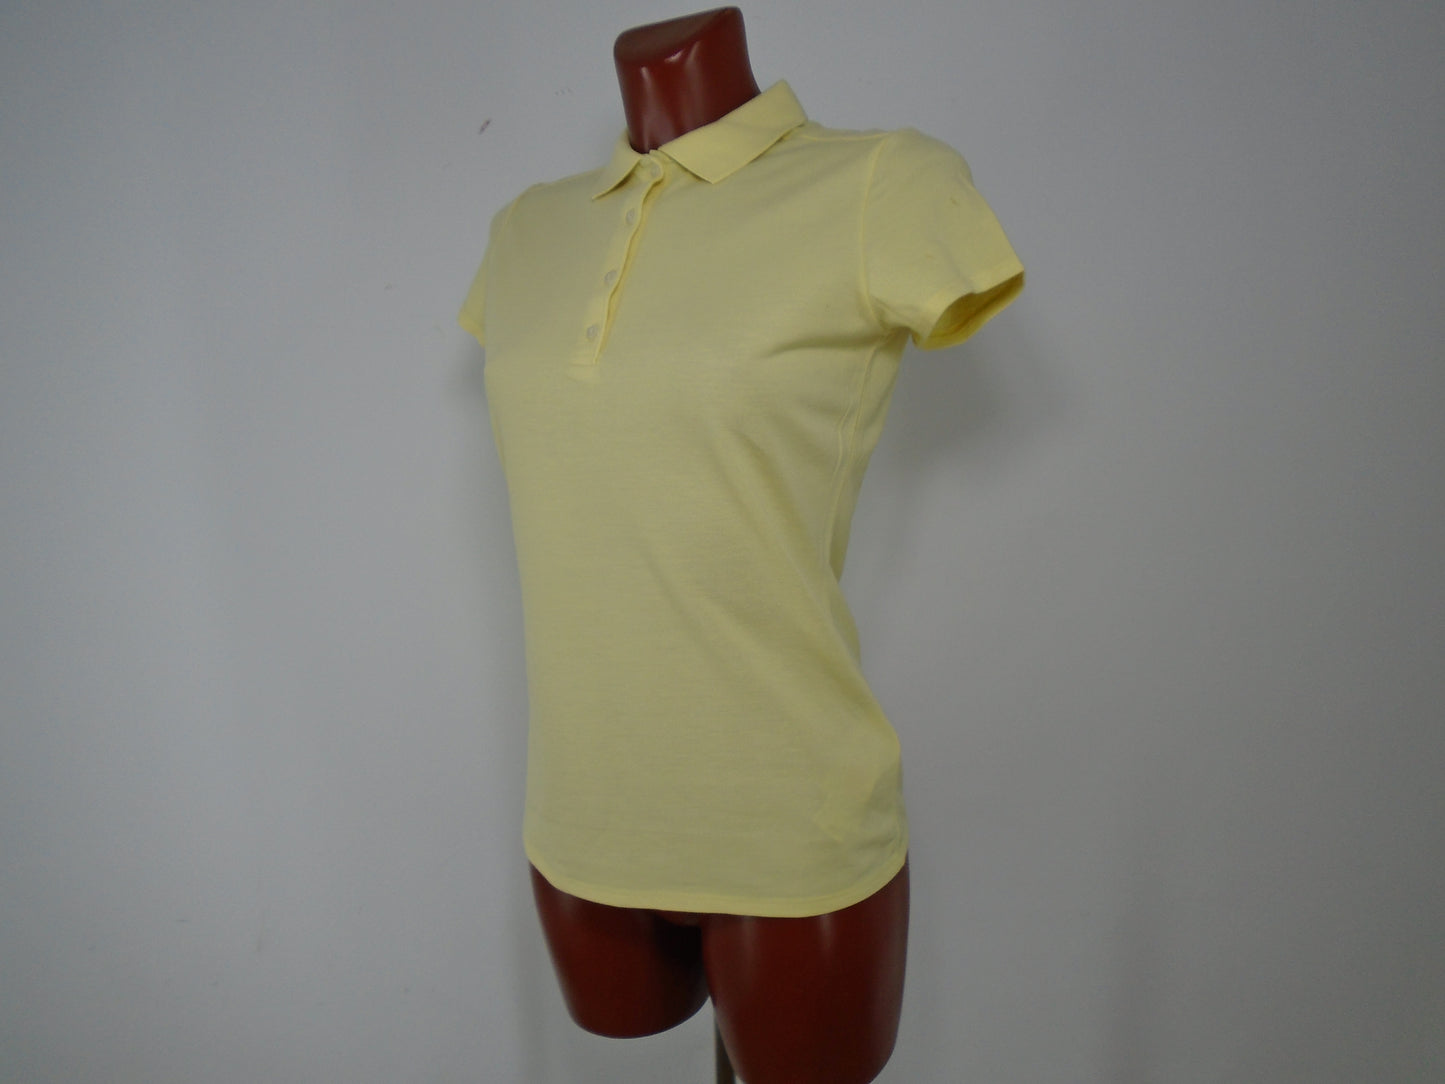 Women's Shirt Decathlon. Yellow. XS. New without tags